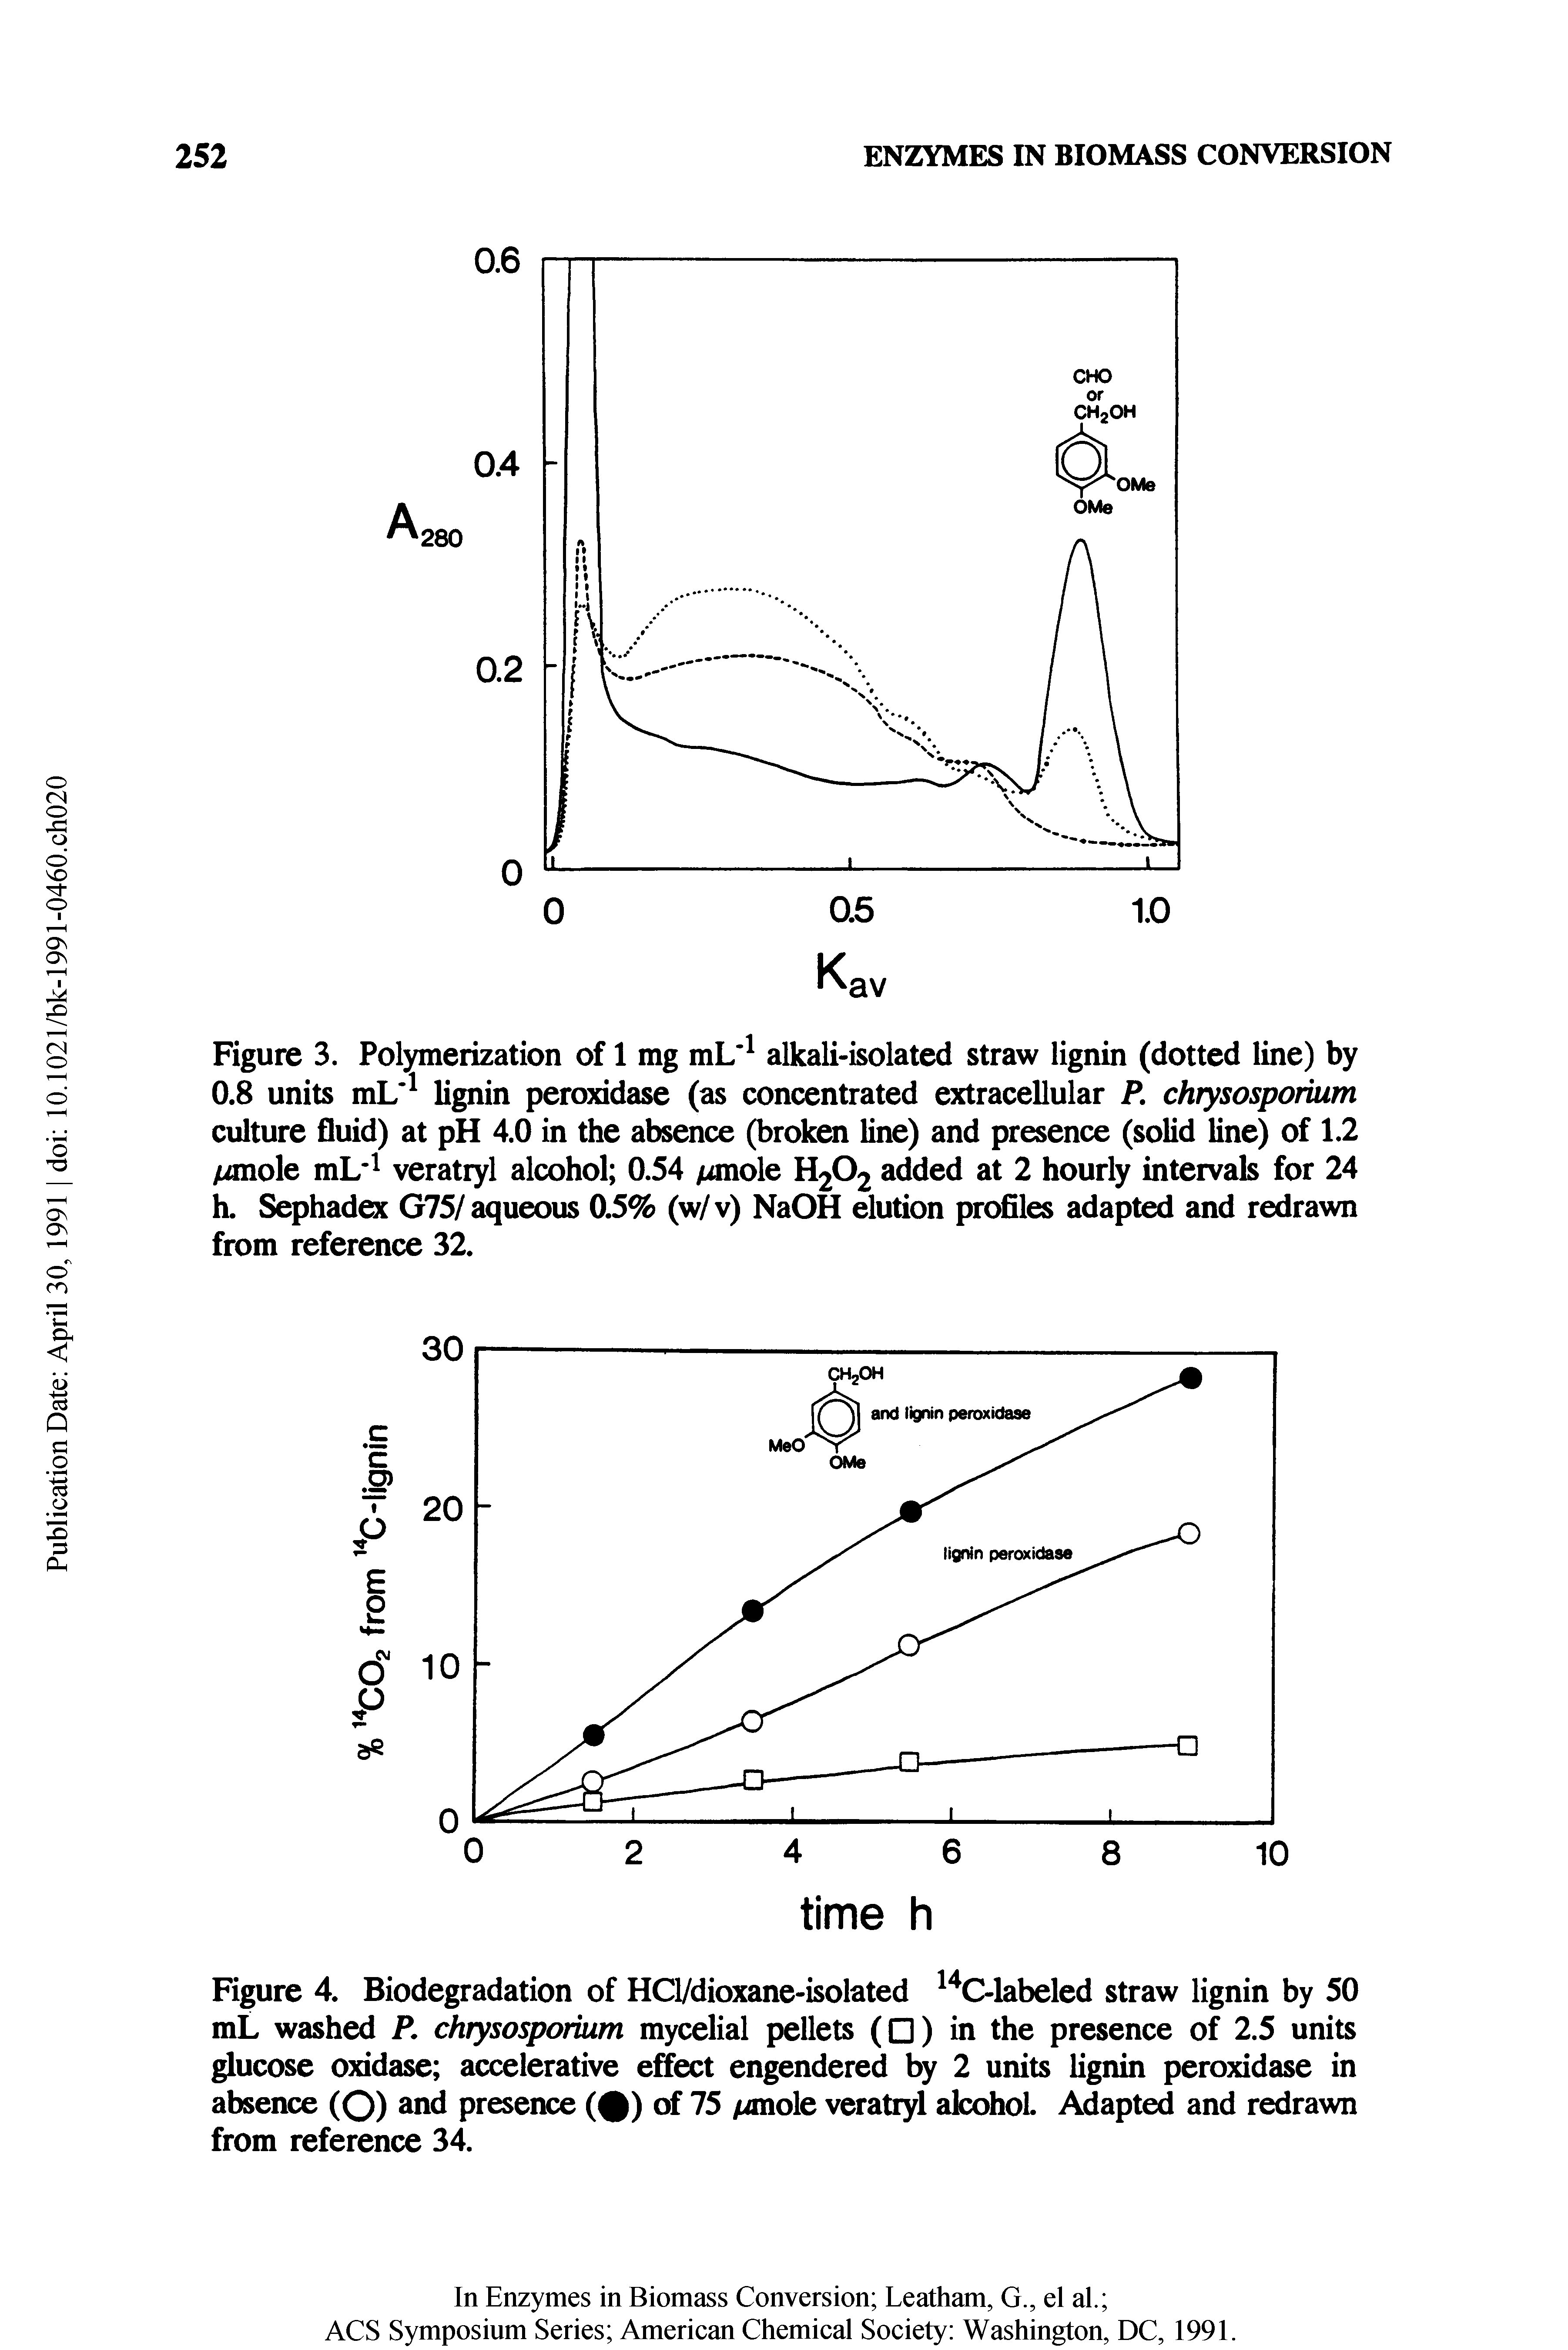 Figure 4. Biodegradation of HCl/dioxane-isolated C-labeled straw lignin by 50 mL washed P. chrysosporium mycelial pellets ( ) in the presence of 2.5 units glucose oxidase accelerative effect engendered by 2 units lignin peroxidase in absence (Q) and presence (H) of 75 /imole veratryl alcohol. Adapted and redrawn from reference 34.